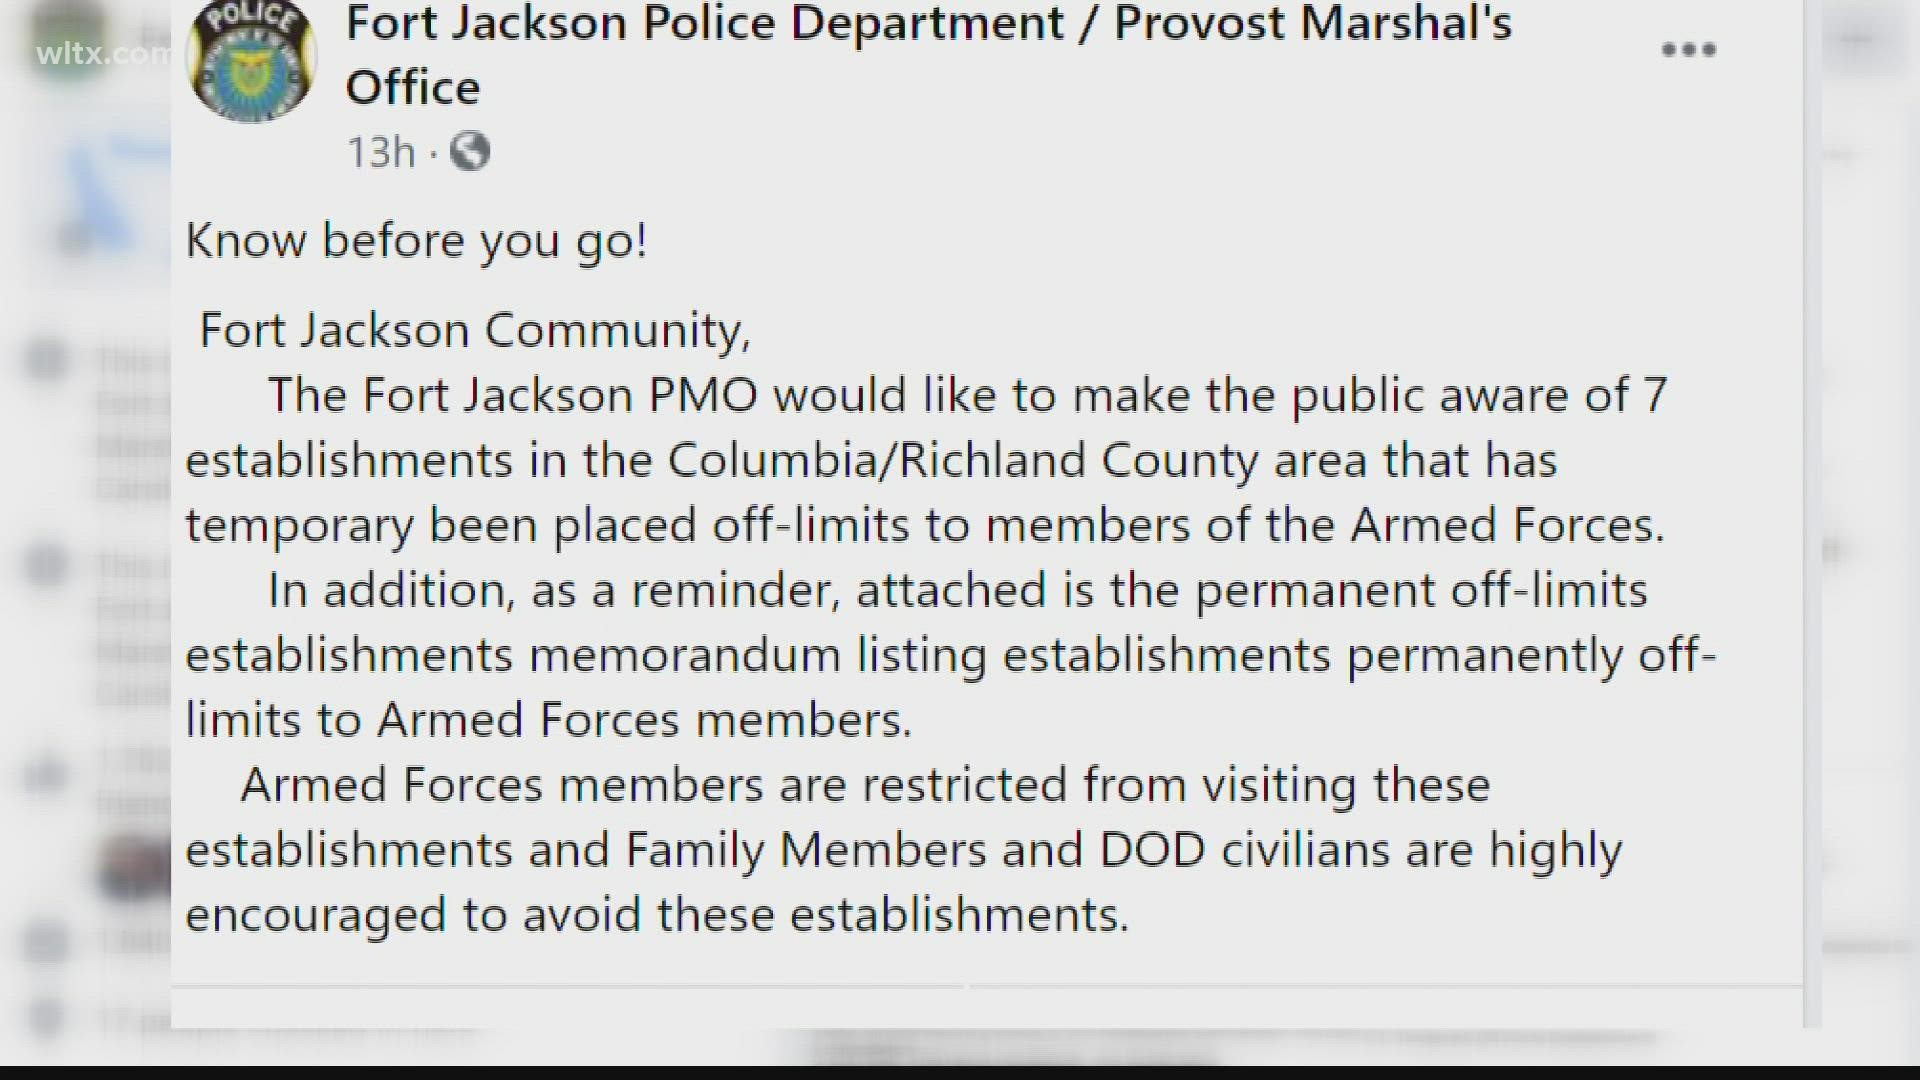 Certain places in the Midlands are now off limits for Fort Jackson personnel, according to a Facebook post by the world's largest army training facility.